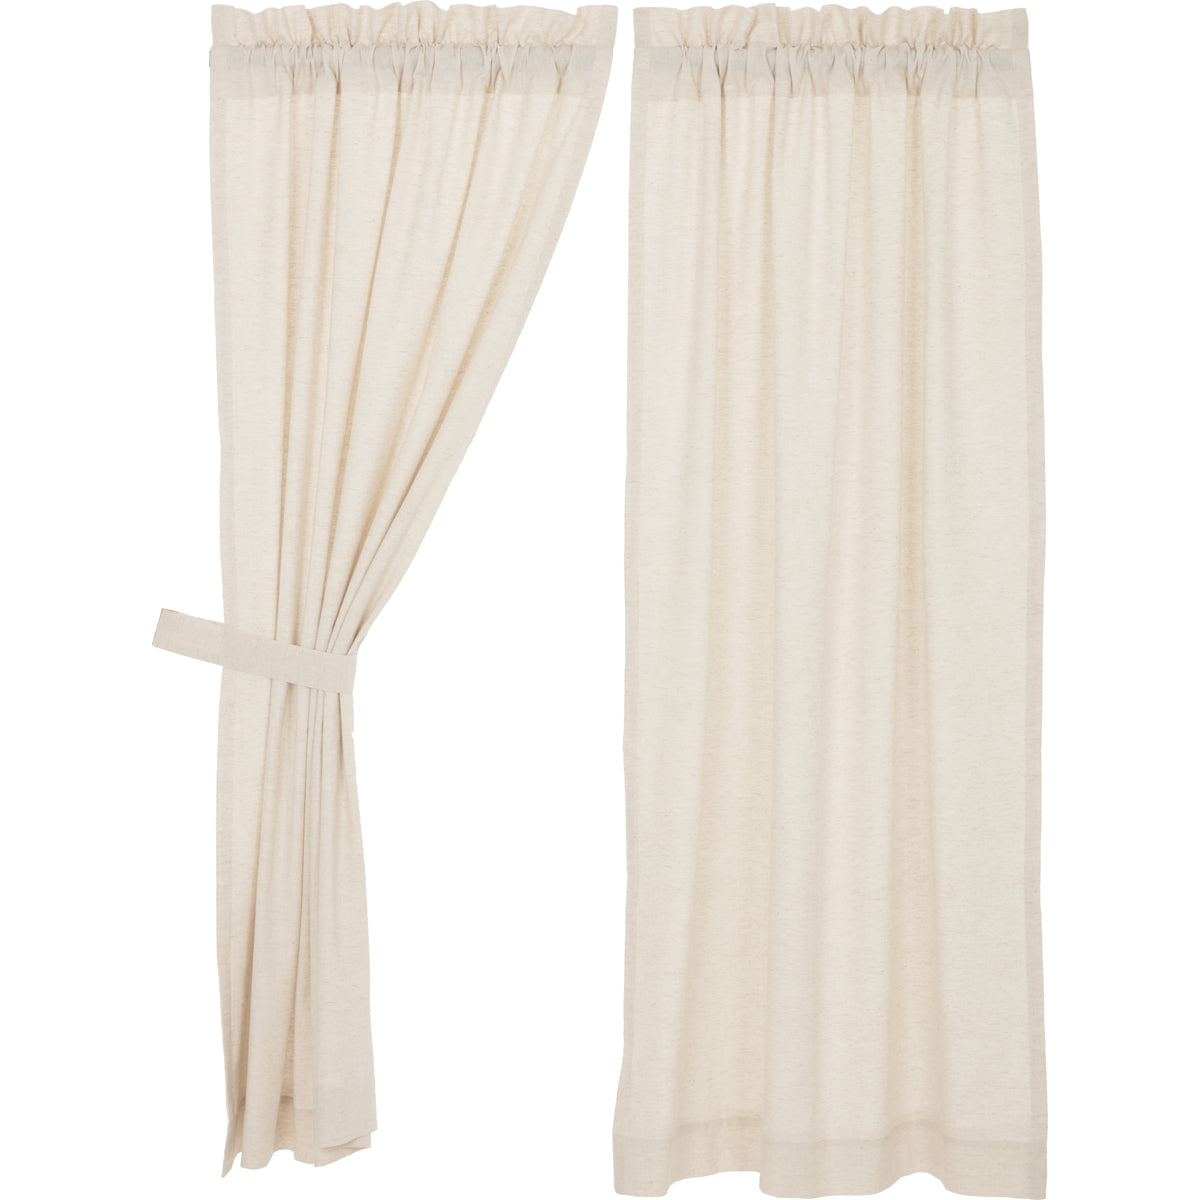 Simple Life Flax Natural Short Panel Set of 2 63x36